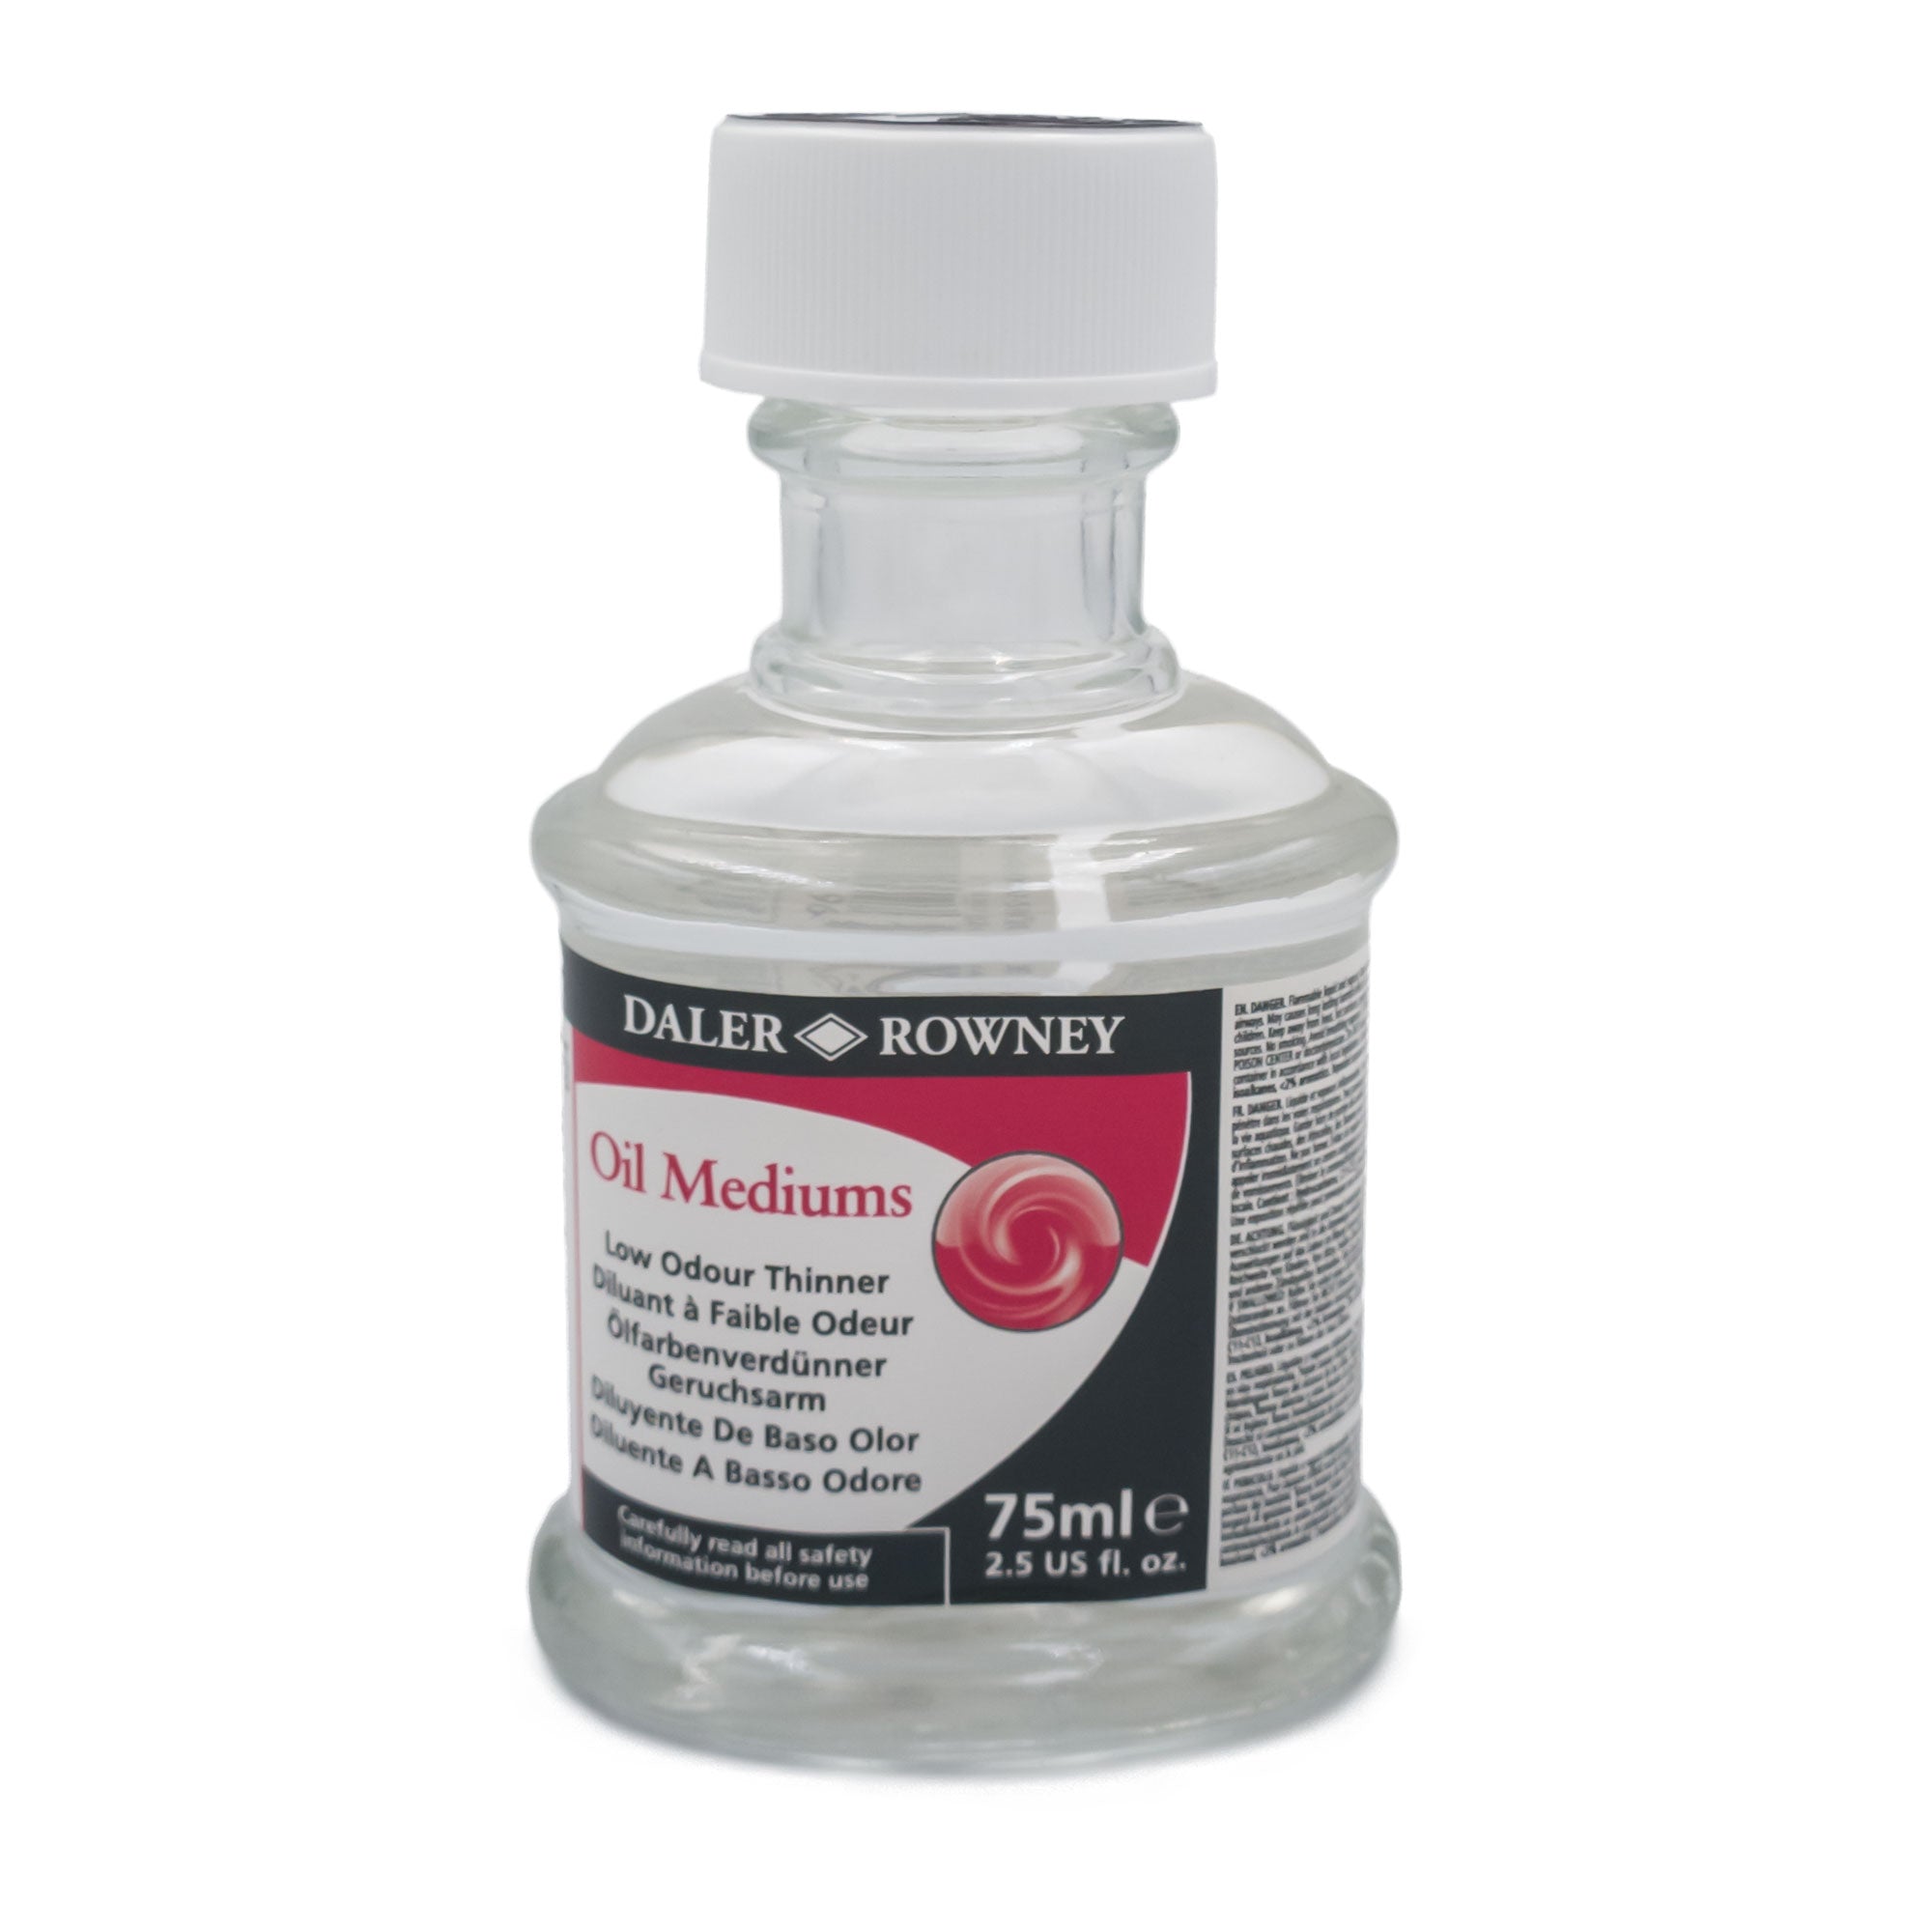 Daler-Rowney Low Odour Thinners - 75ml